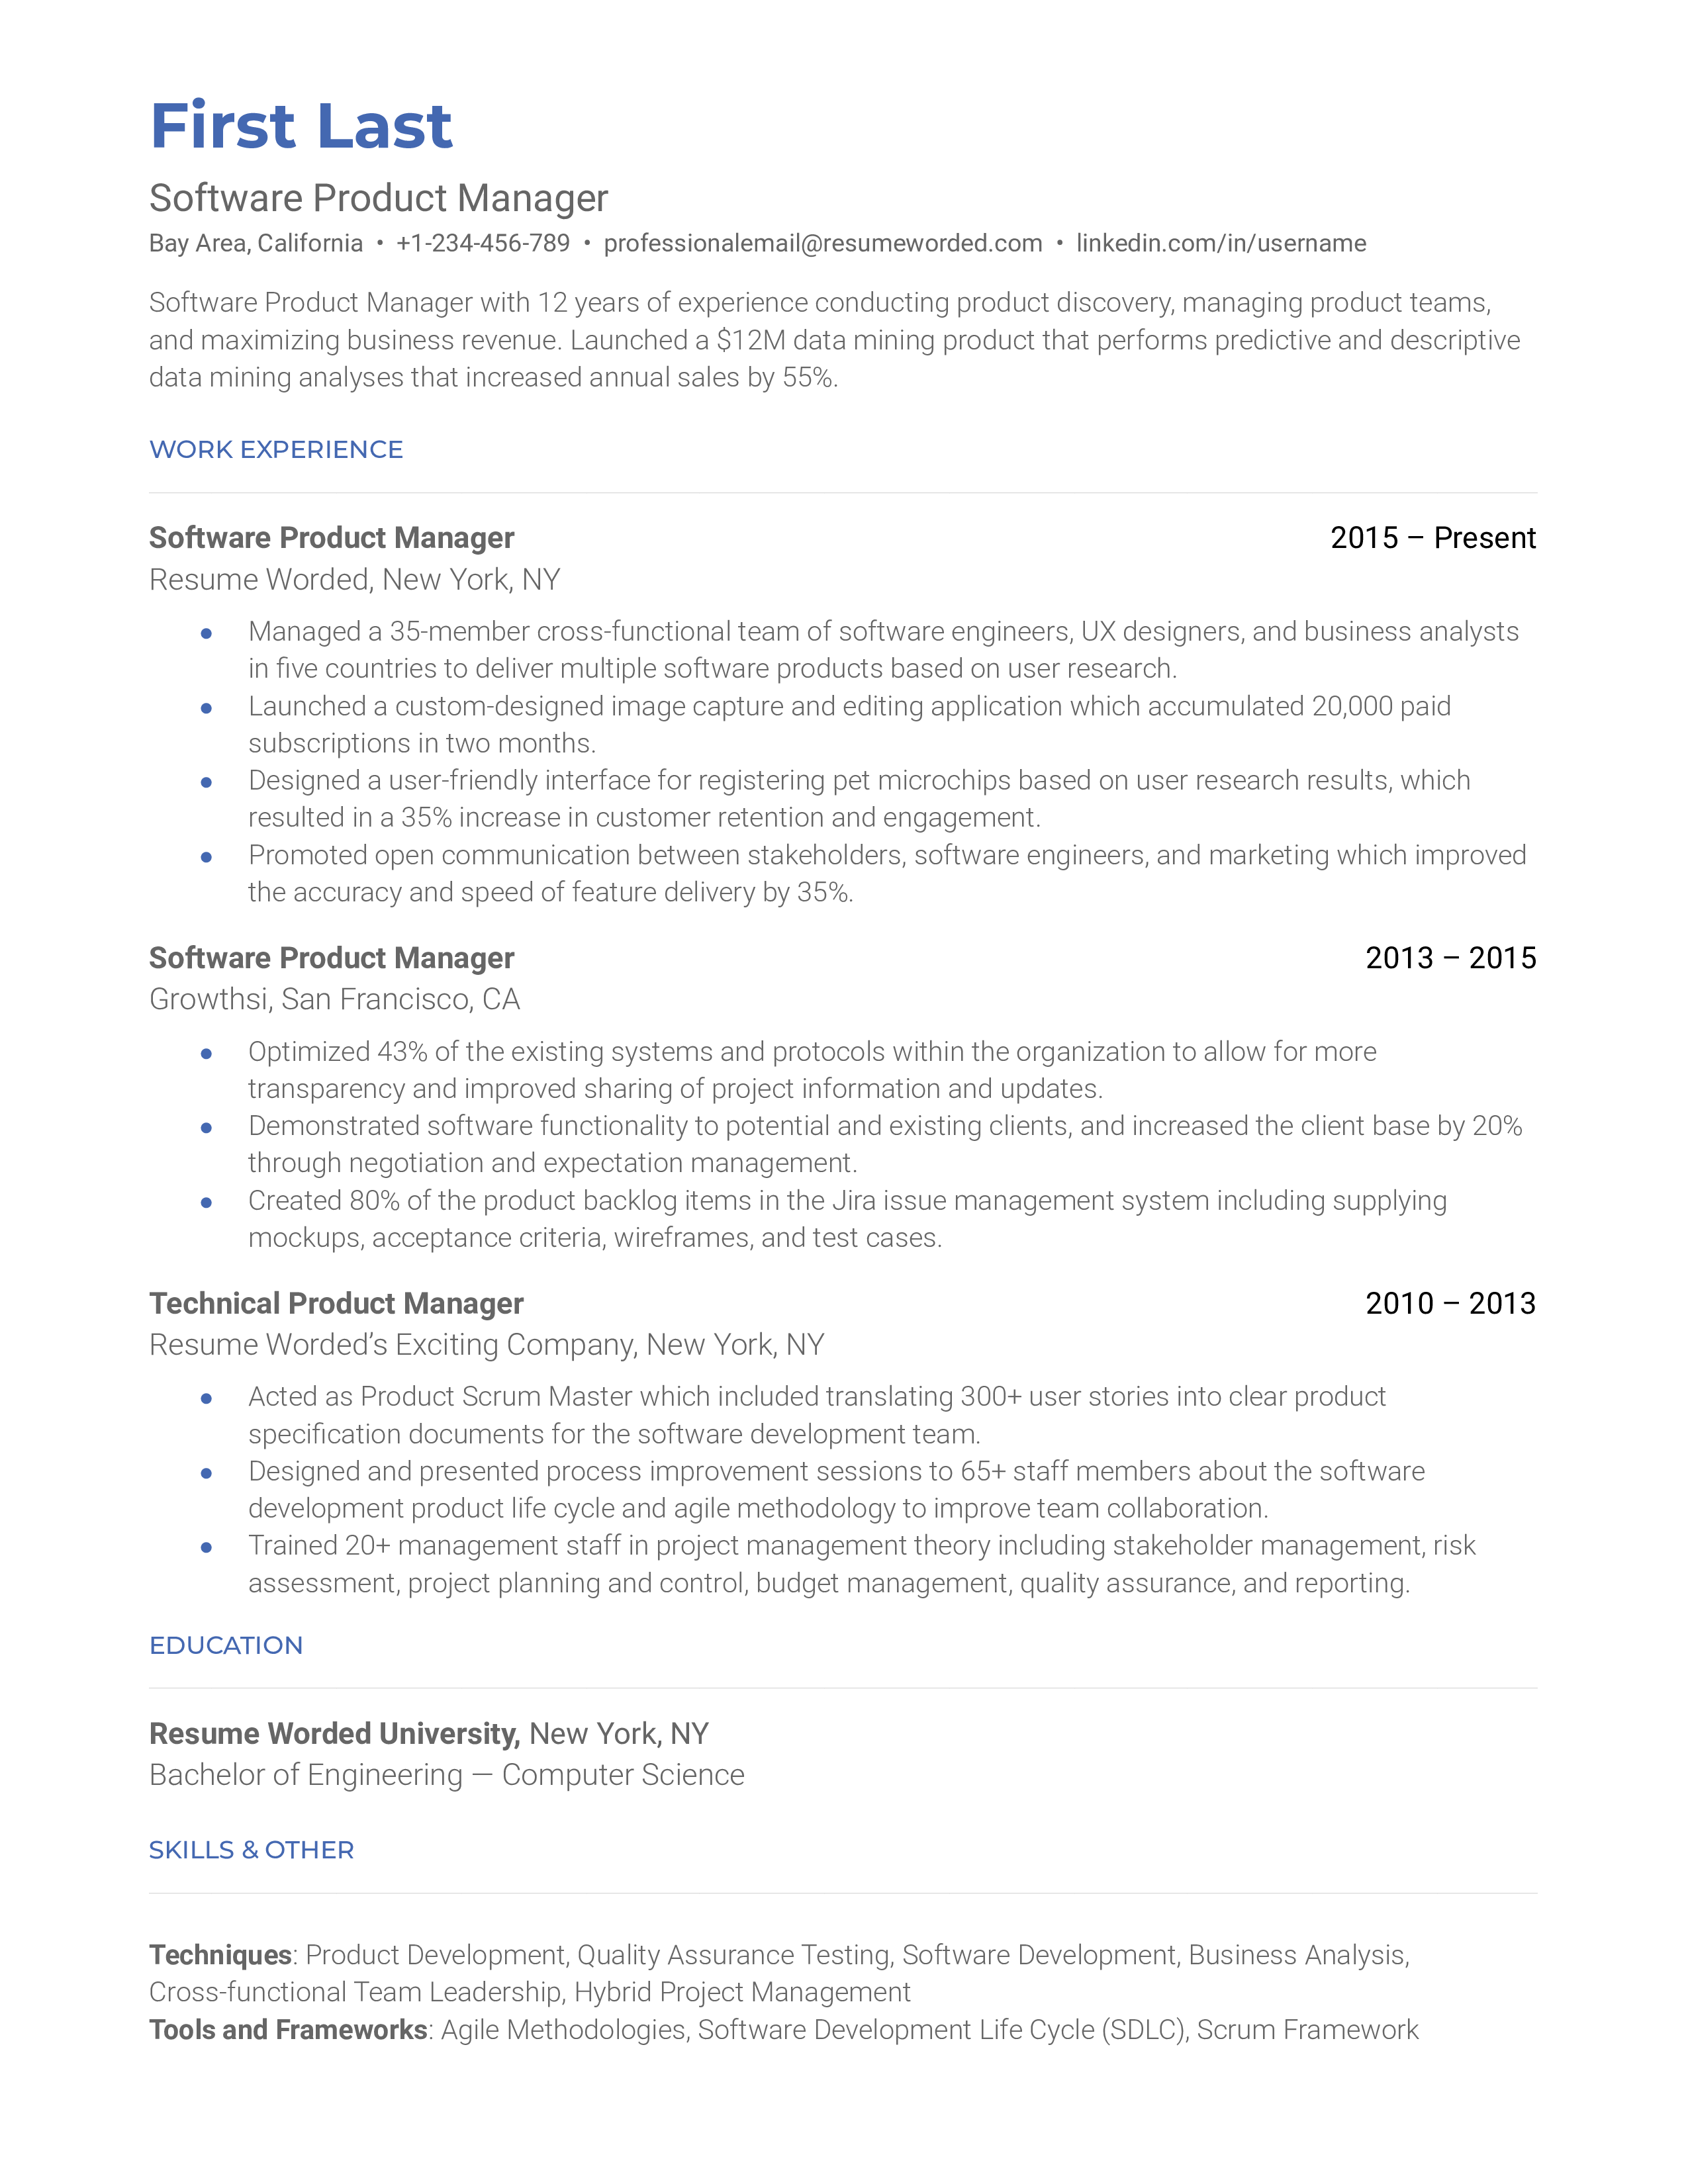 Software product manager resume sample that highlights the applicant’s software related skills and experience.